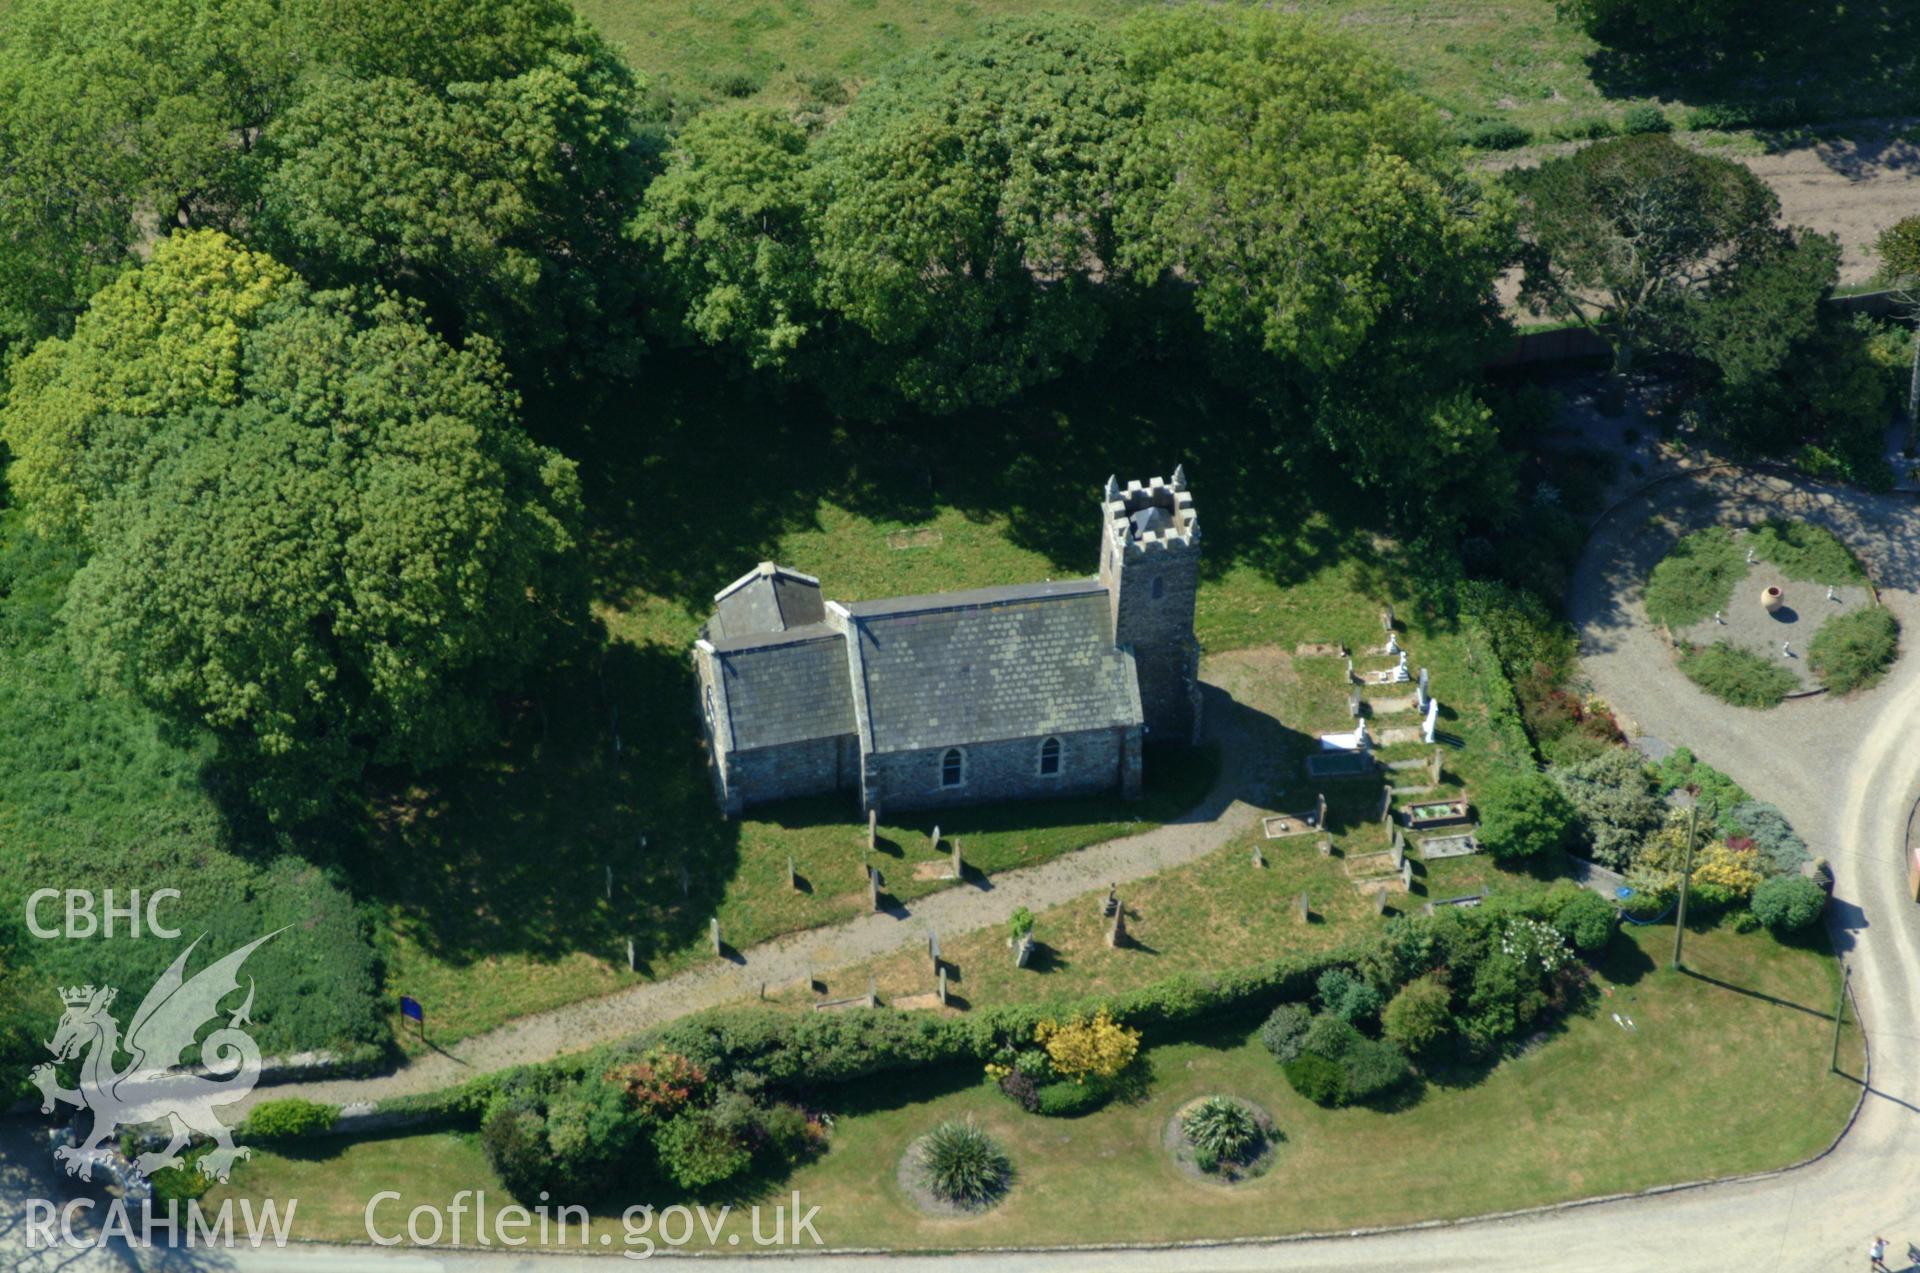 RCAHMW colour oblique aerial photograph of St Cwrda's Church taken on 25/05/2004 by Toby Driver